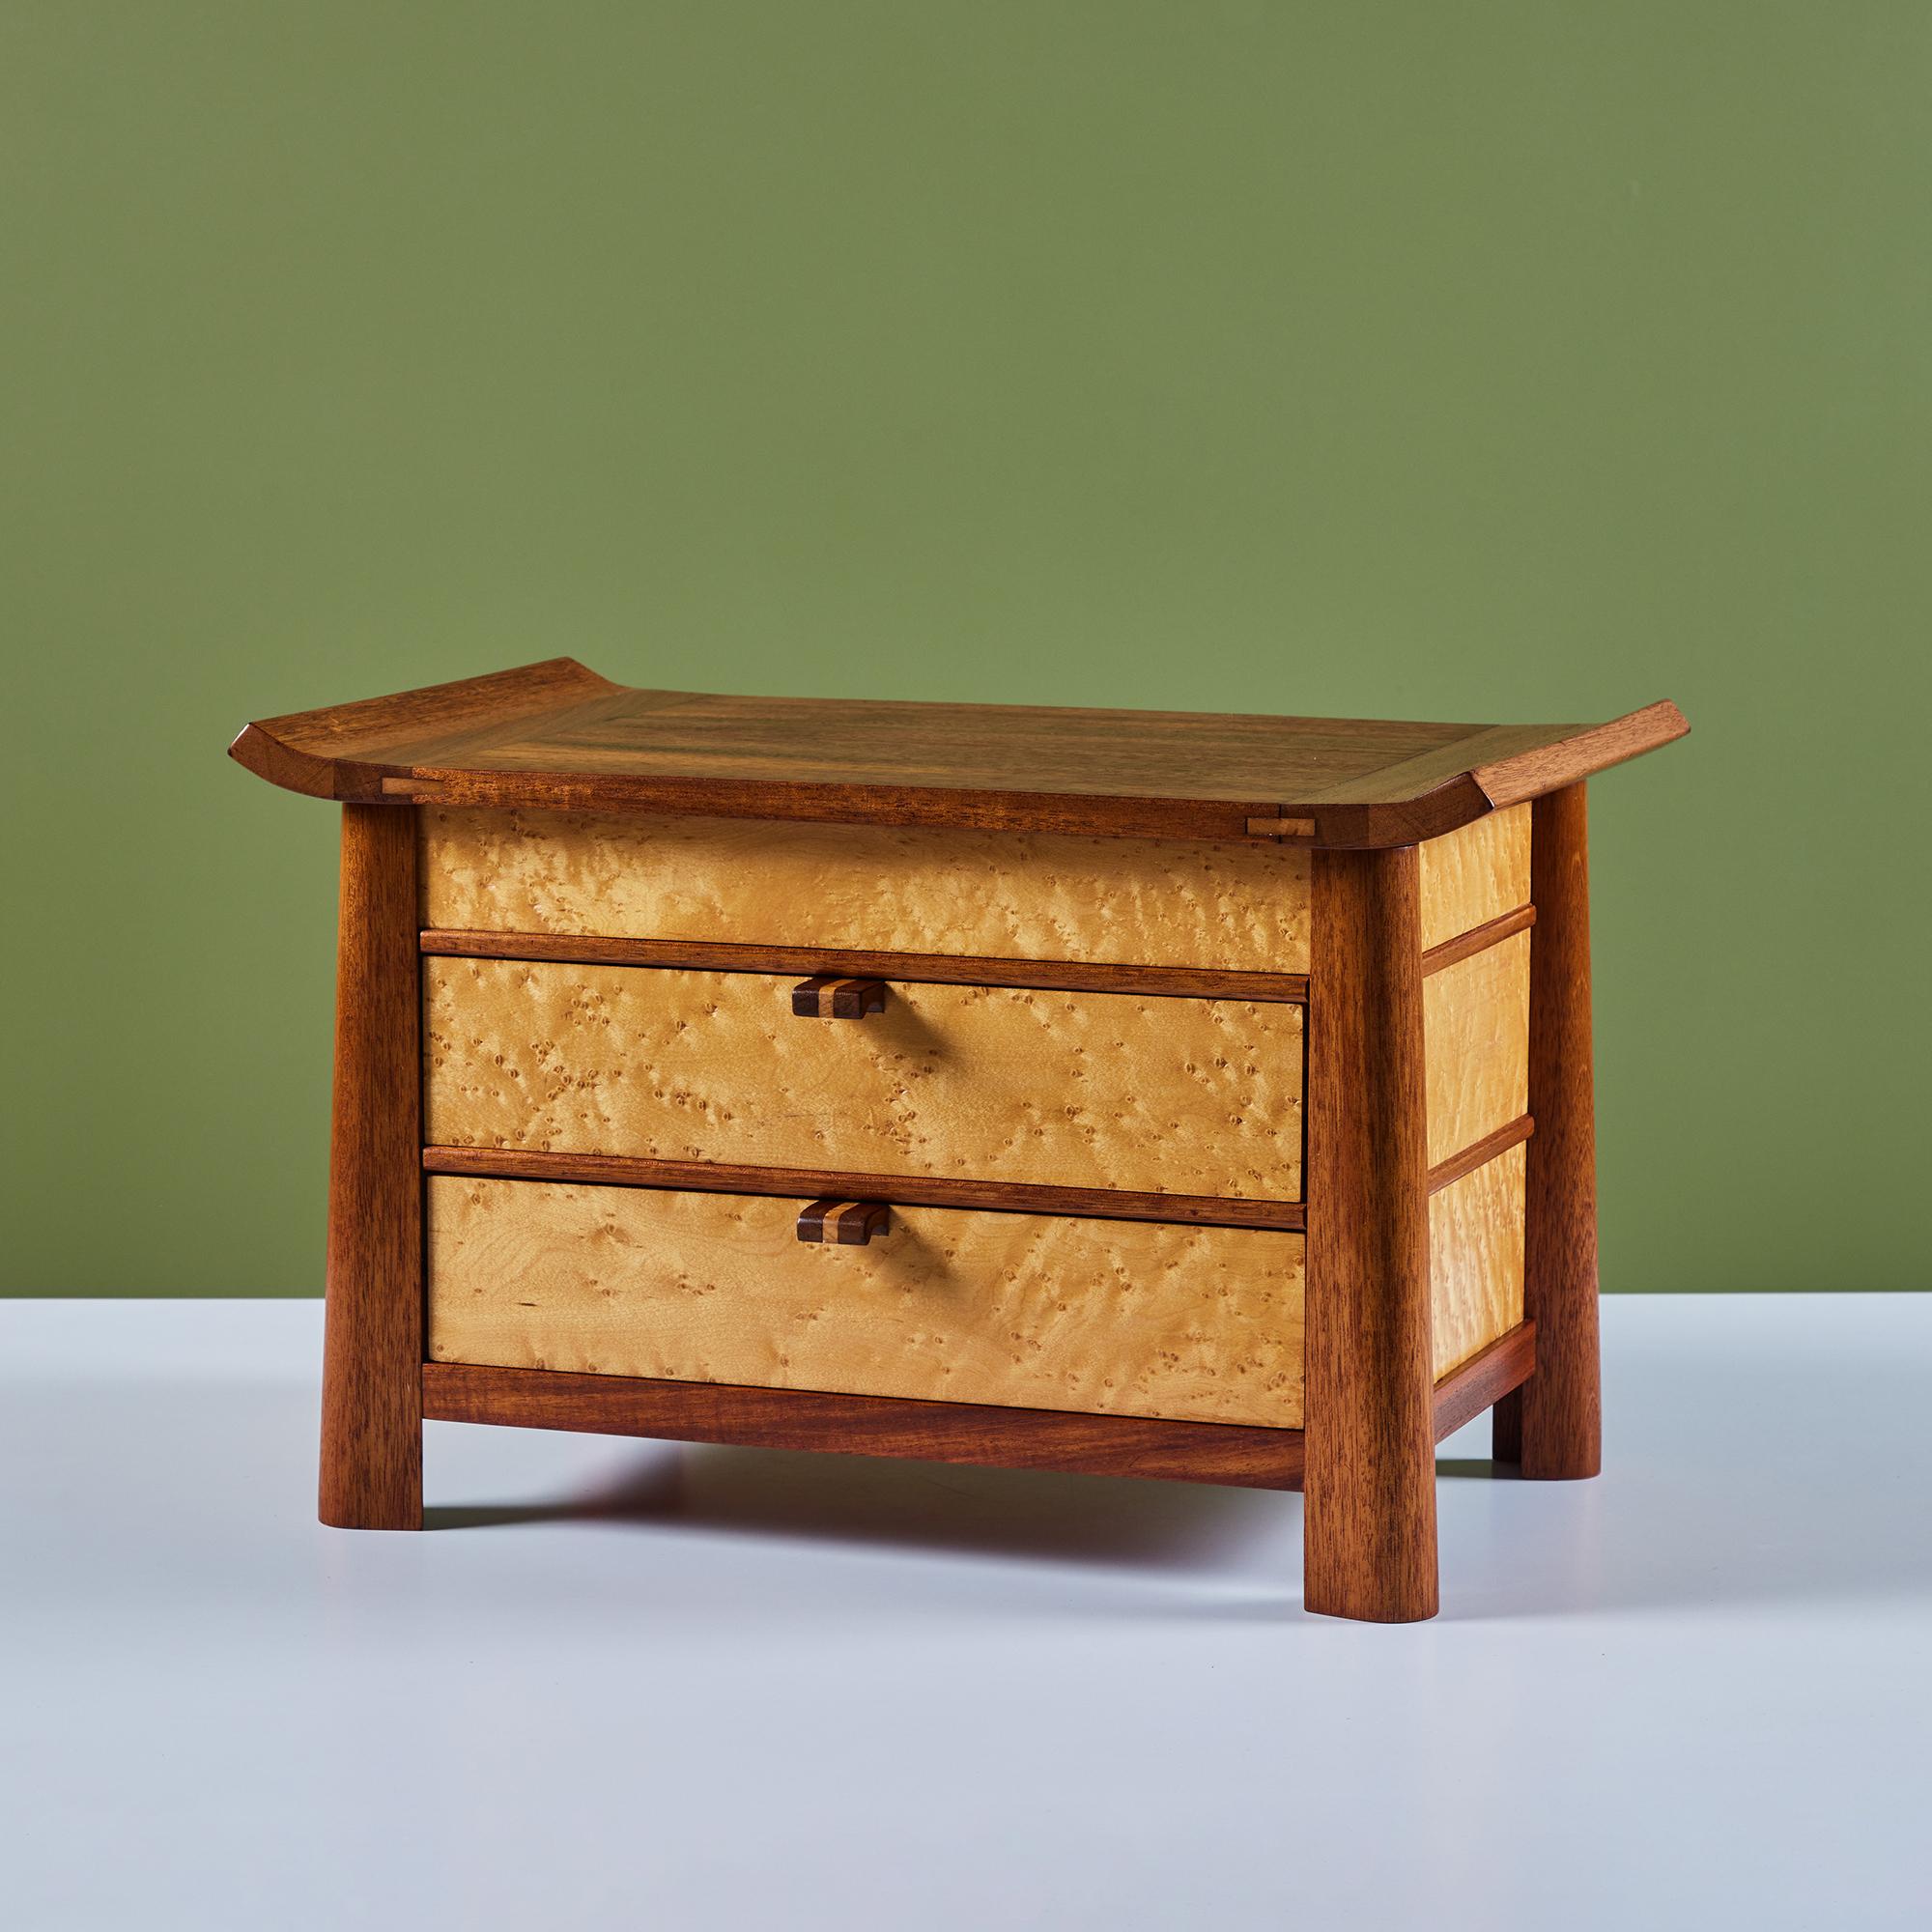 Jewelry chest beautifully crafted with birdseye maple drawers and a mahogany frame. The box features two drawers and a third top compartment when the sculpted wood lid is removed. The box sits slightly elevated on four mahogany legs.

Dimensions
20